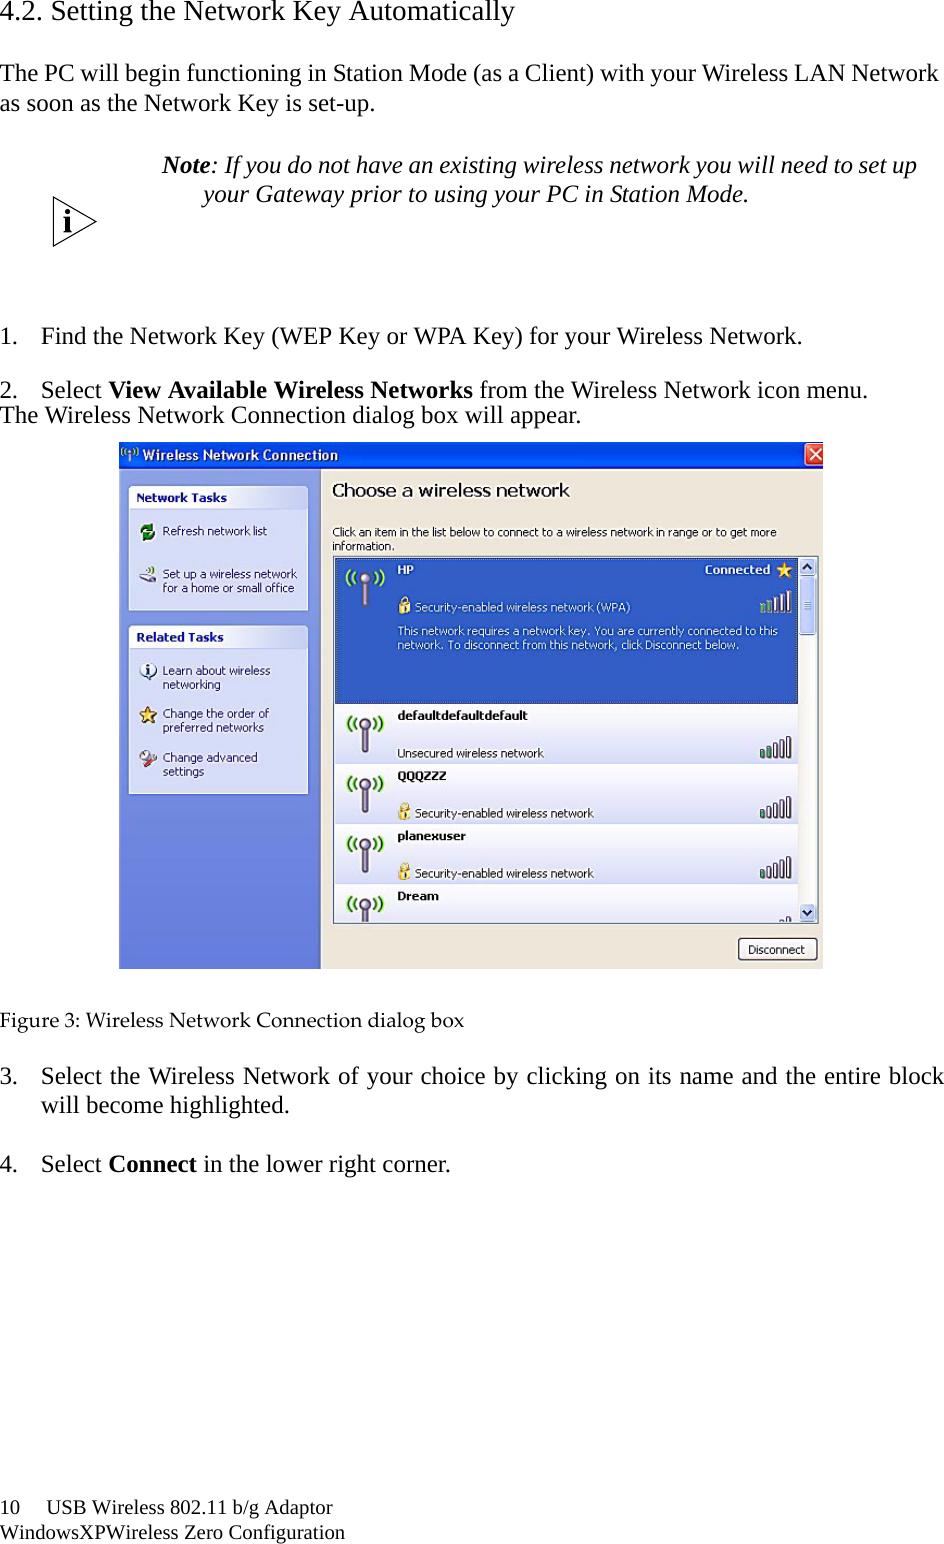 10     USB Wireless 802.11 b/g AdaptorWindowsXPWireless Zero Configuration4.2. Setting the Network Key AutomaticallyThe PC will begin functioning in Station Mode (as a Client) with your Wireless LAN Network as soon as the Network Key is set-up.1. Find the Network Key (WEP Key or WPA Key) for your Wireless Network.2. Select View Available Wireless Networks from the Wireless Network icon menu.The Wireless Network Connection dialog box will appear.Figure3:WirelessNetworkConnectiondialogbox3. Select the Wireless Network of your choice by clicking on its name and the entire blockwill become highlighted.4. Select Connect in the lower right corner.Note: If you do not have an existing wireless network you will need to set upyour Gateway prior to using your PC in Station Mode.